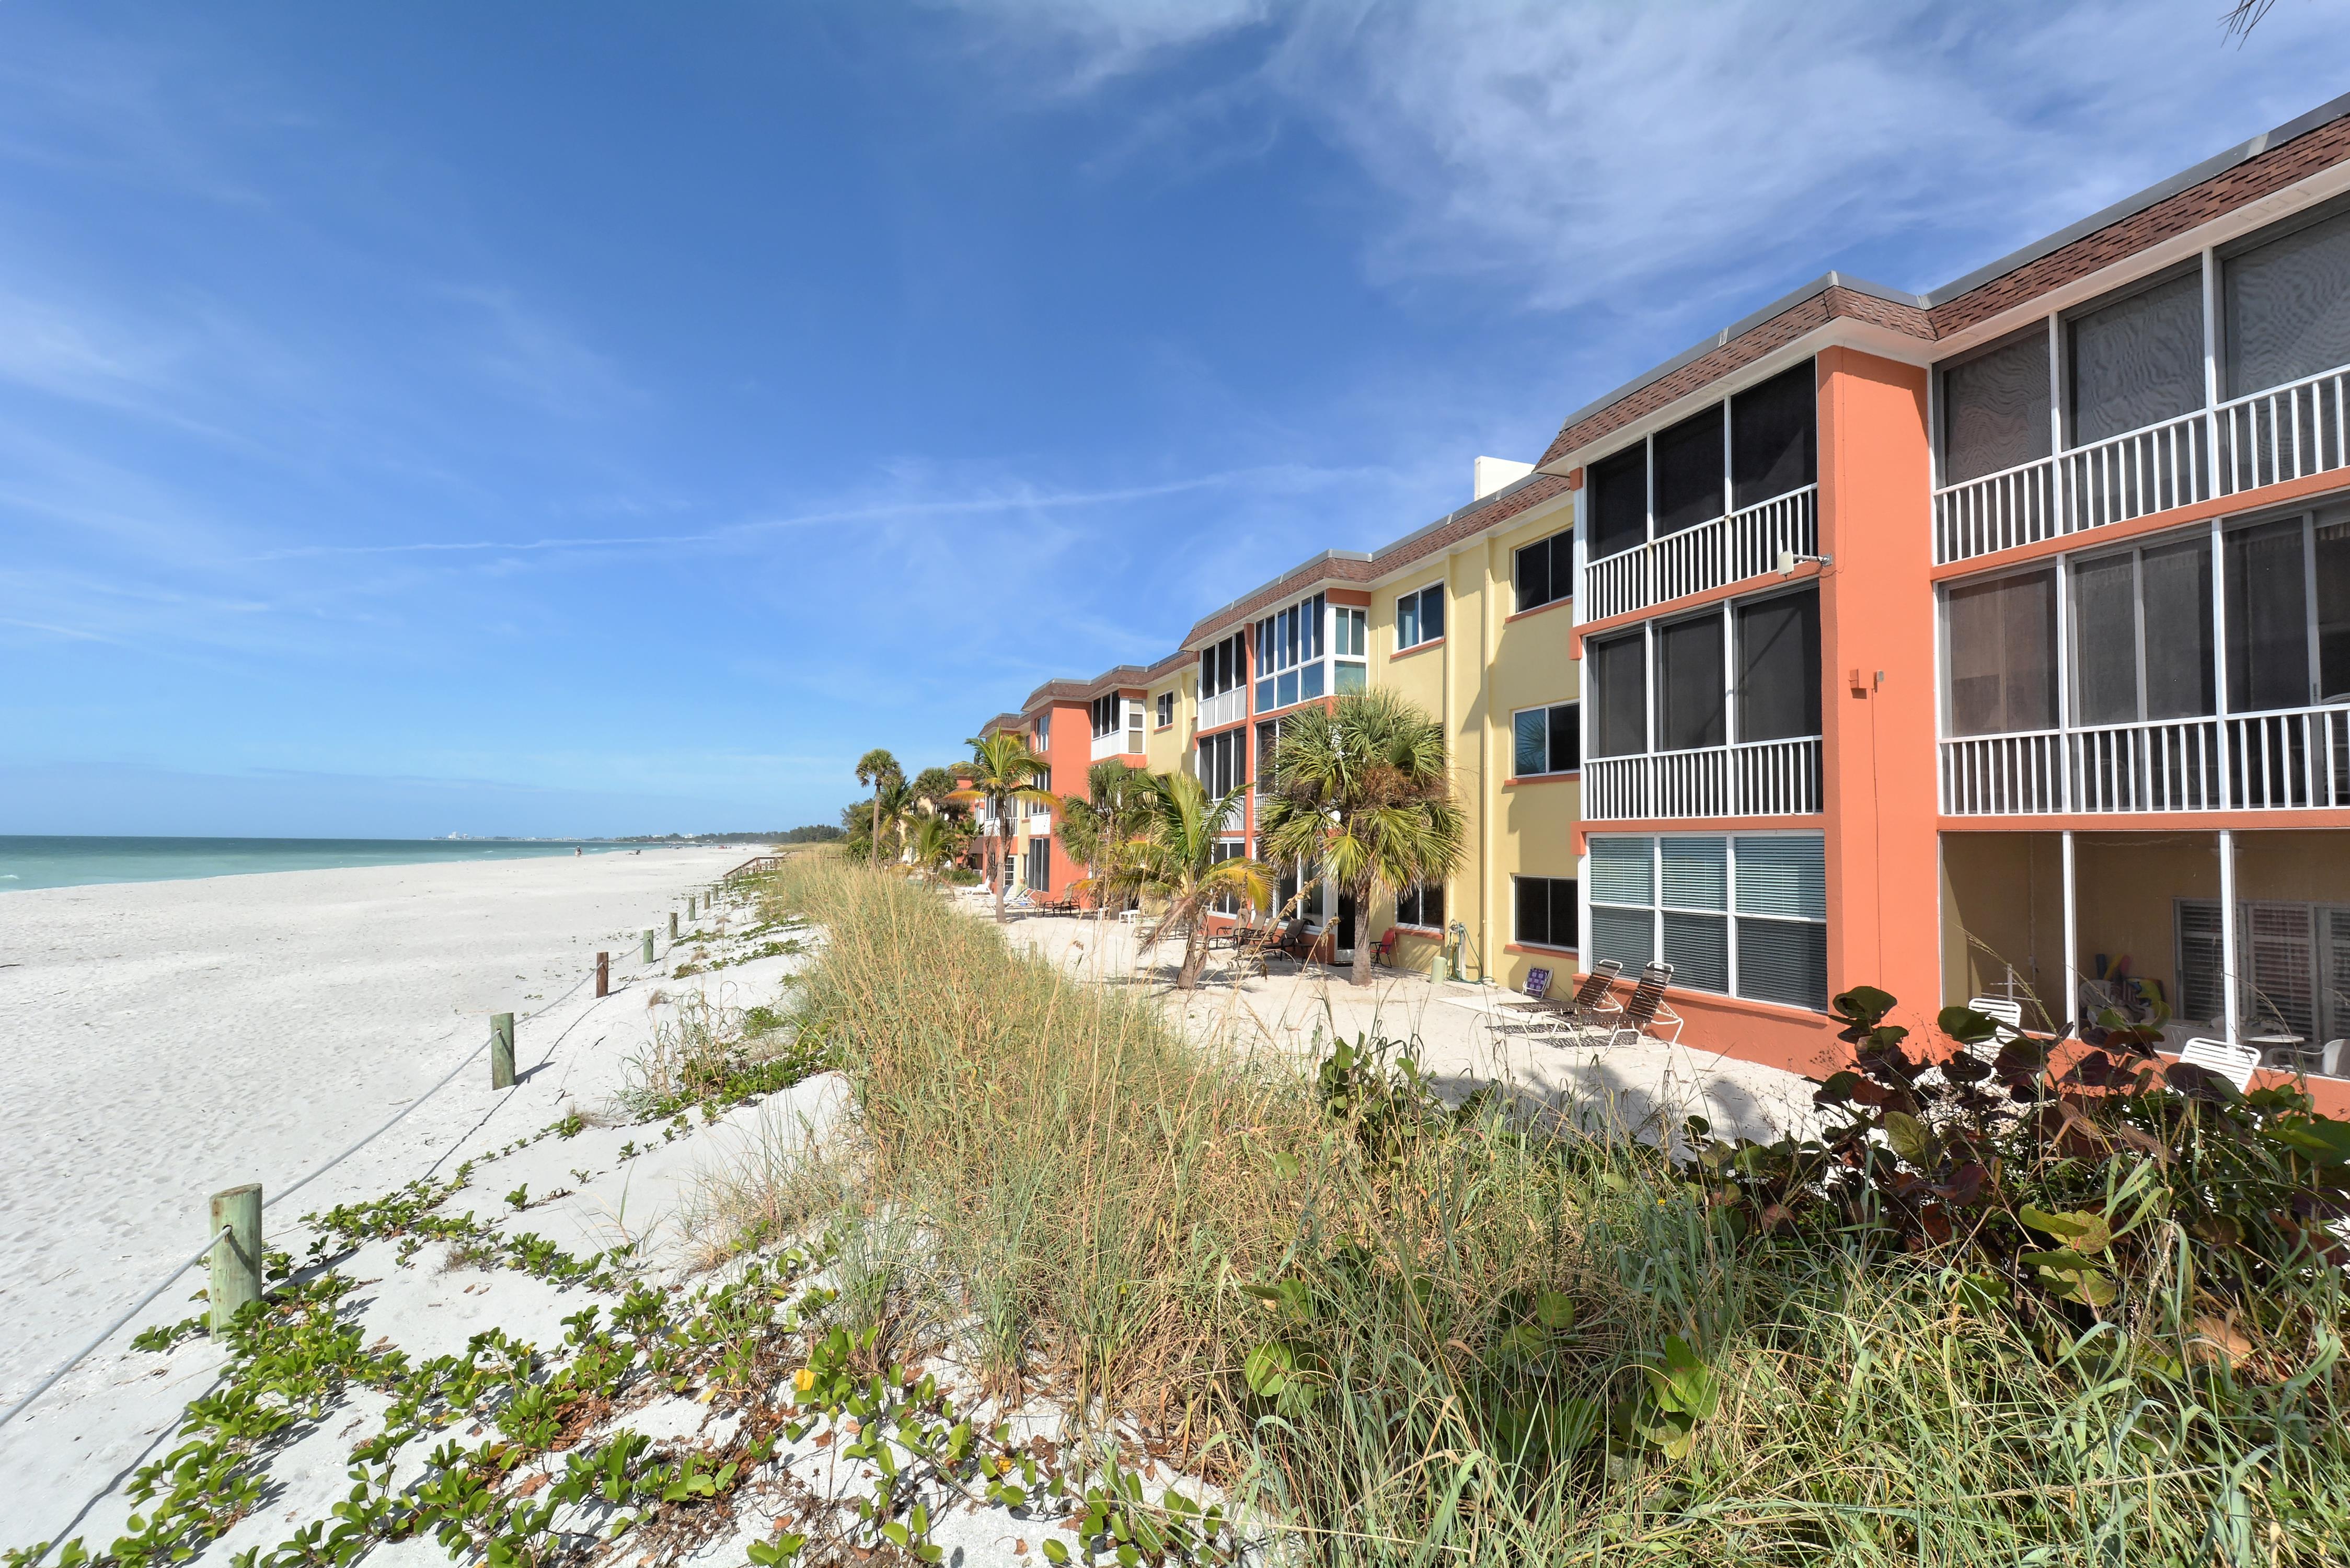 Fisherman's Cove in Siesta Key : Condos for Sale with Gorgeous Views